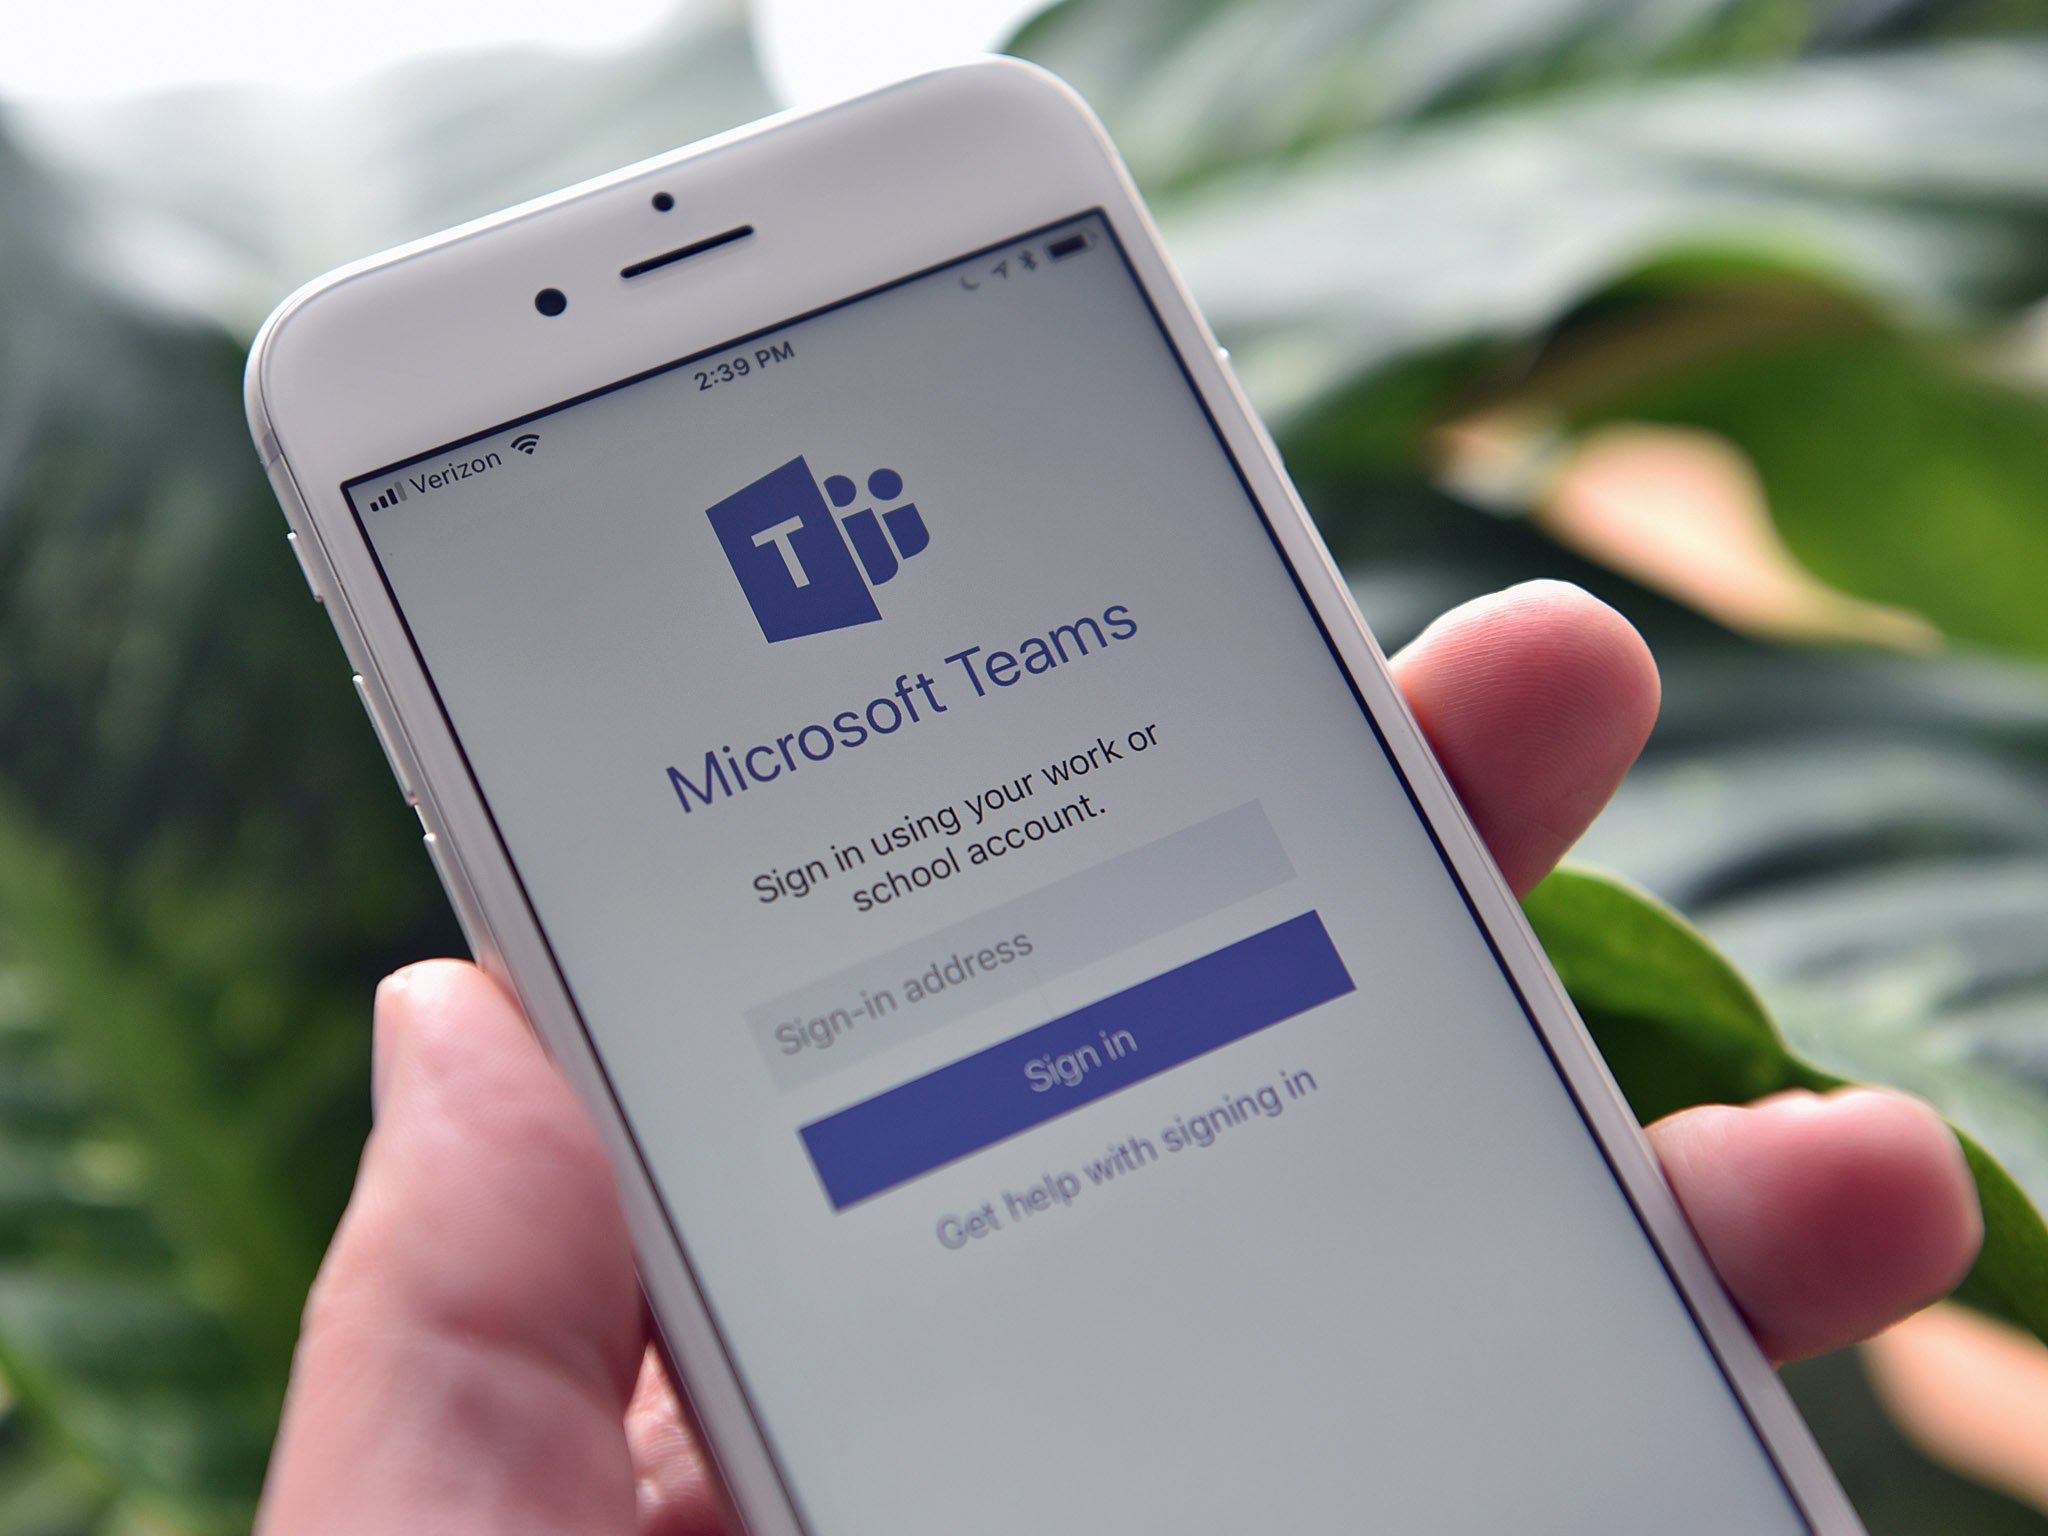 Microsoft Teams for iOS gets new calling features, languages, and more